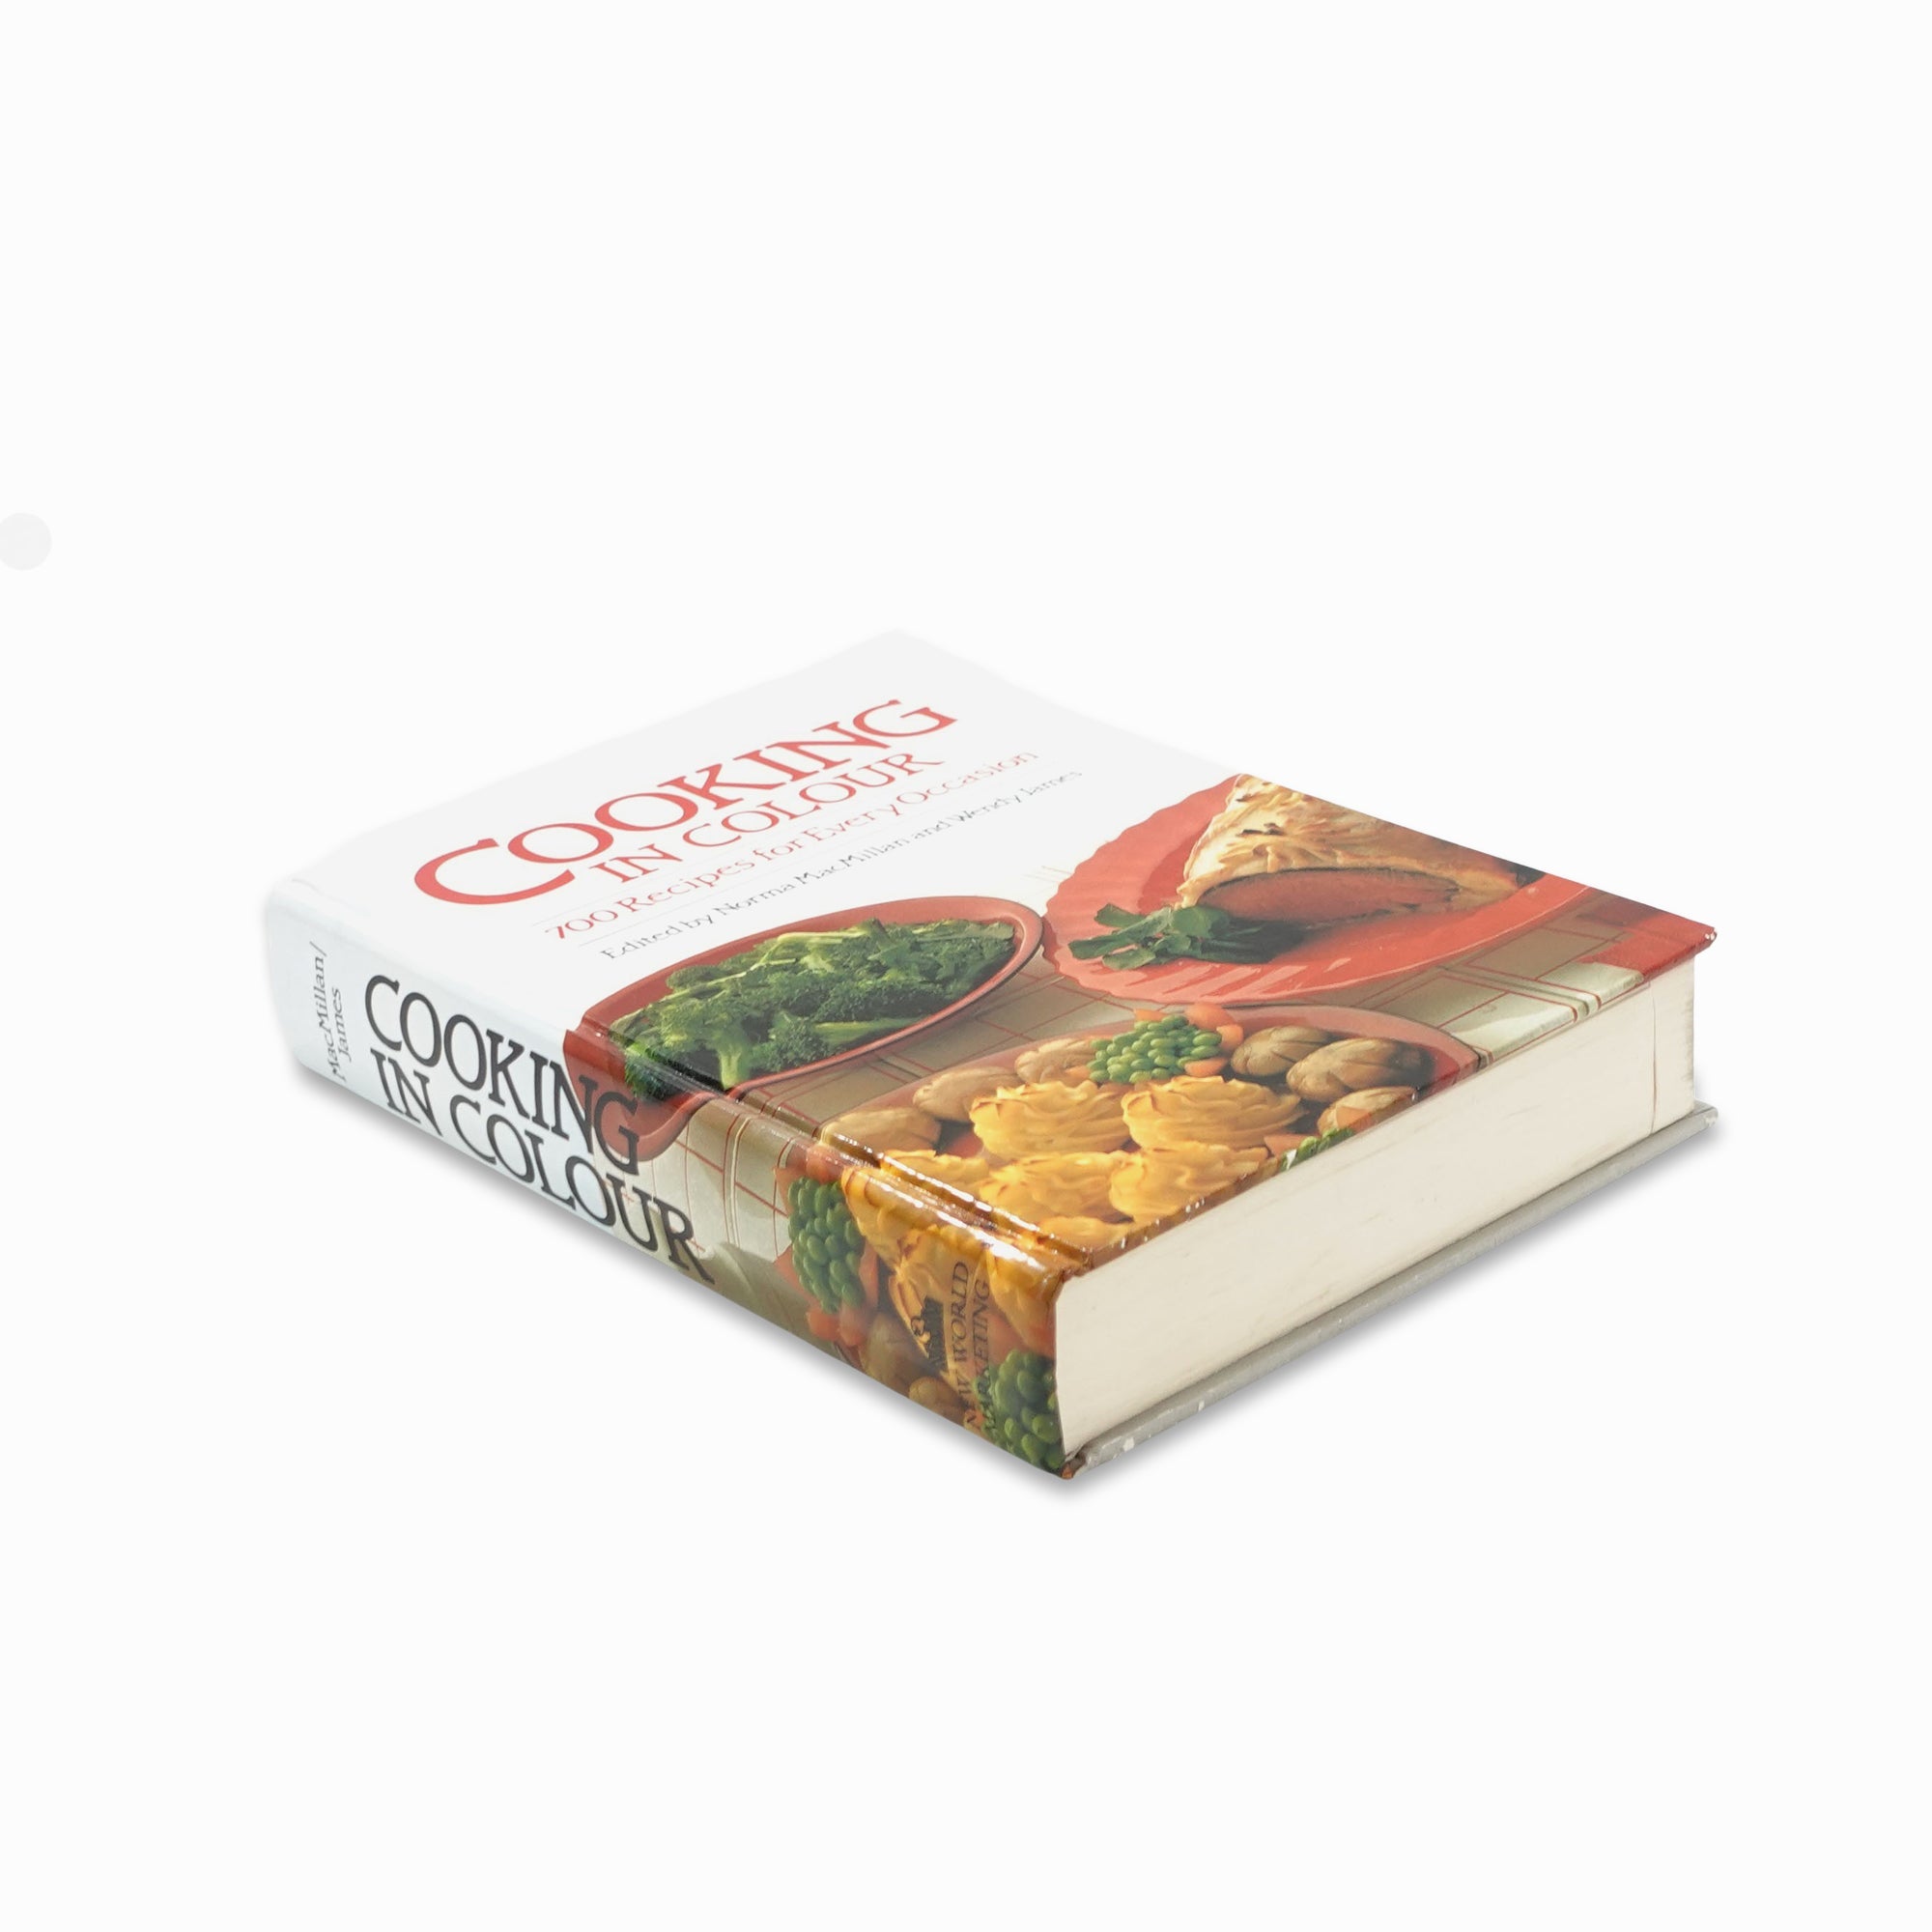 Cooking in Colour Edited by Norma MacMillan and Wendy James - Secret Storage Books